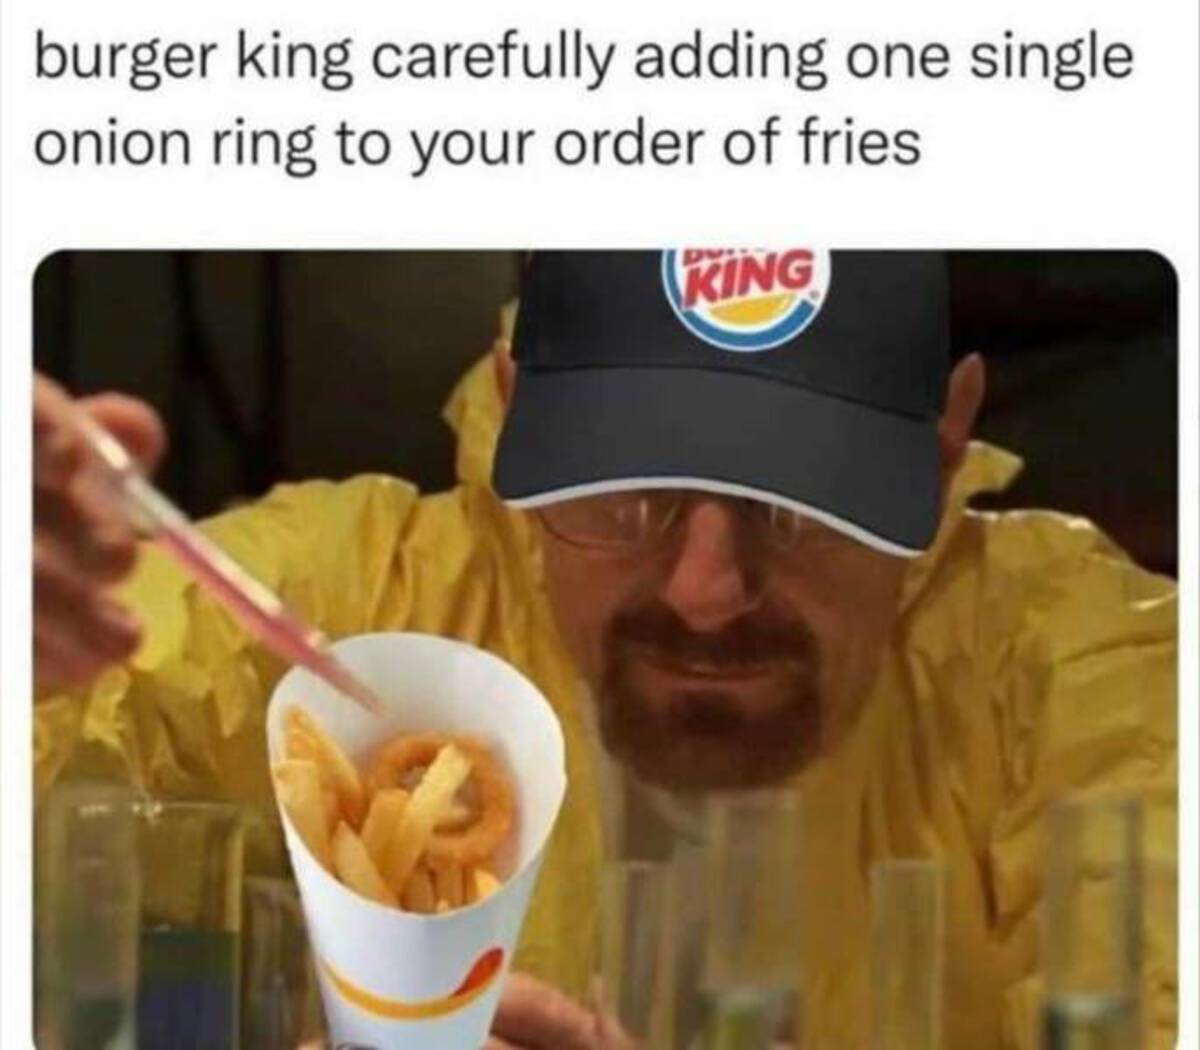 burger king onion ring in fries meme - burger king carefully adding one single onion ring to your order of fries King